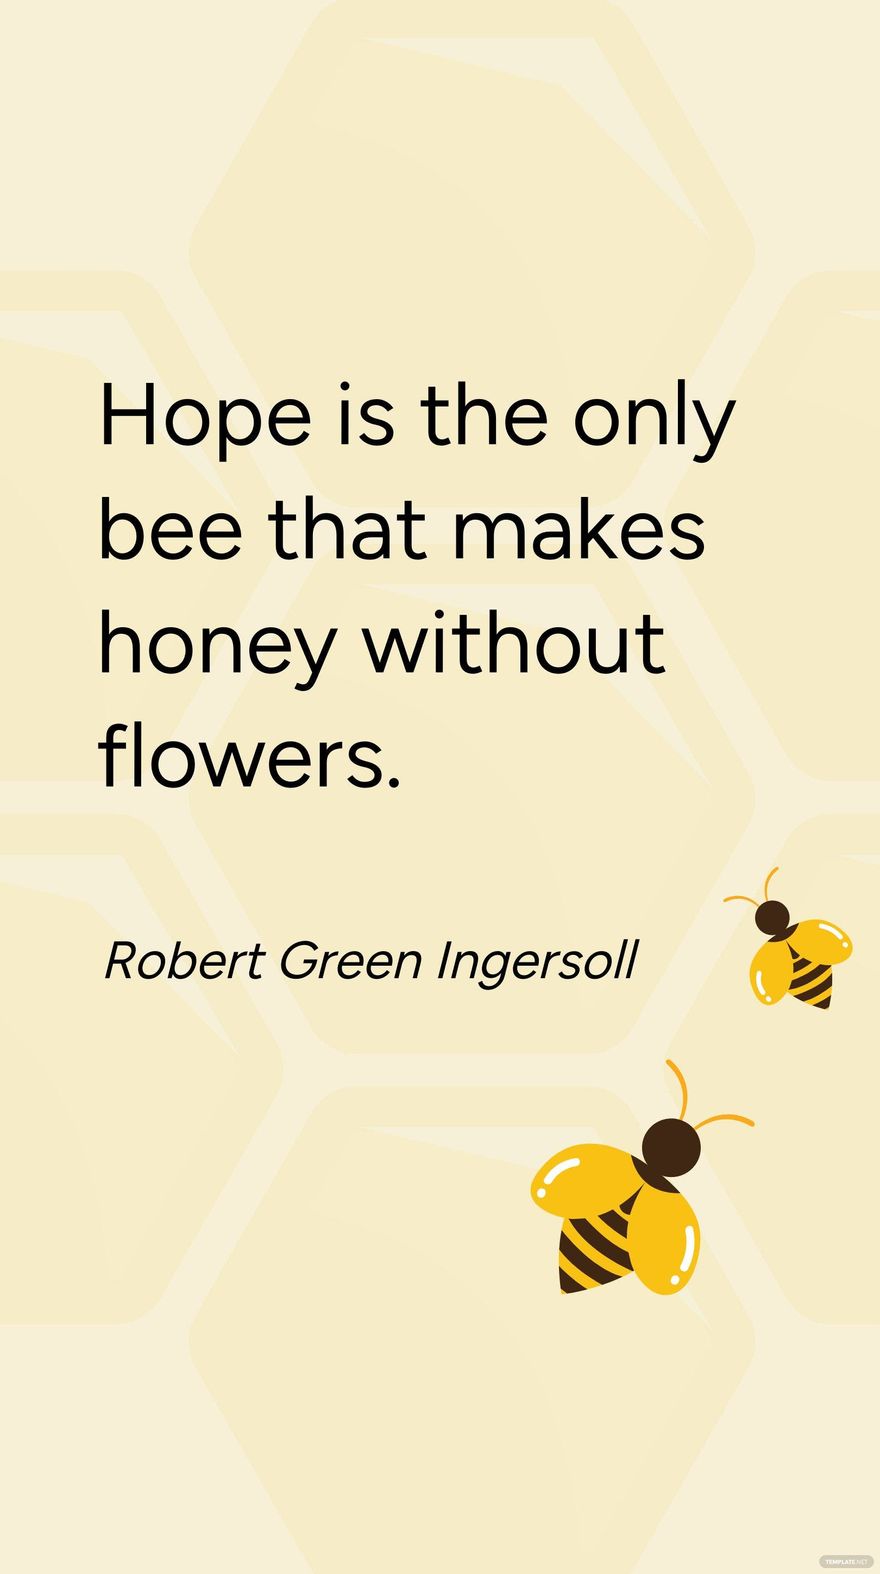 Free Robert Green Ingersoll - Hope is the only bee that makes honey without flowers.